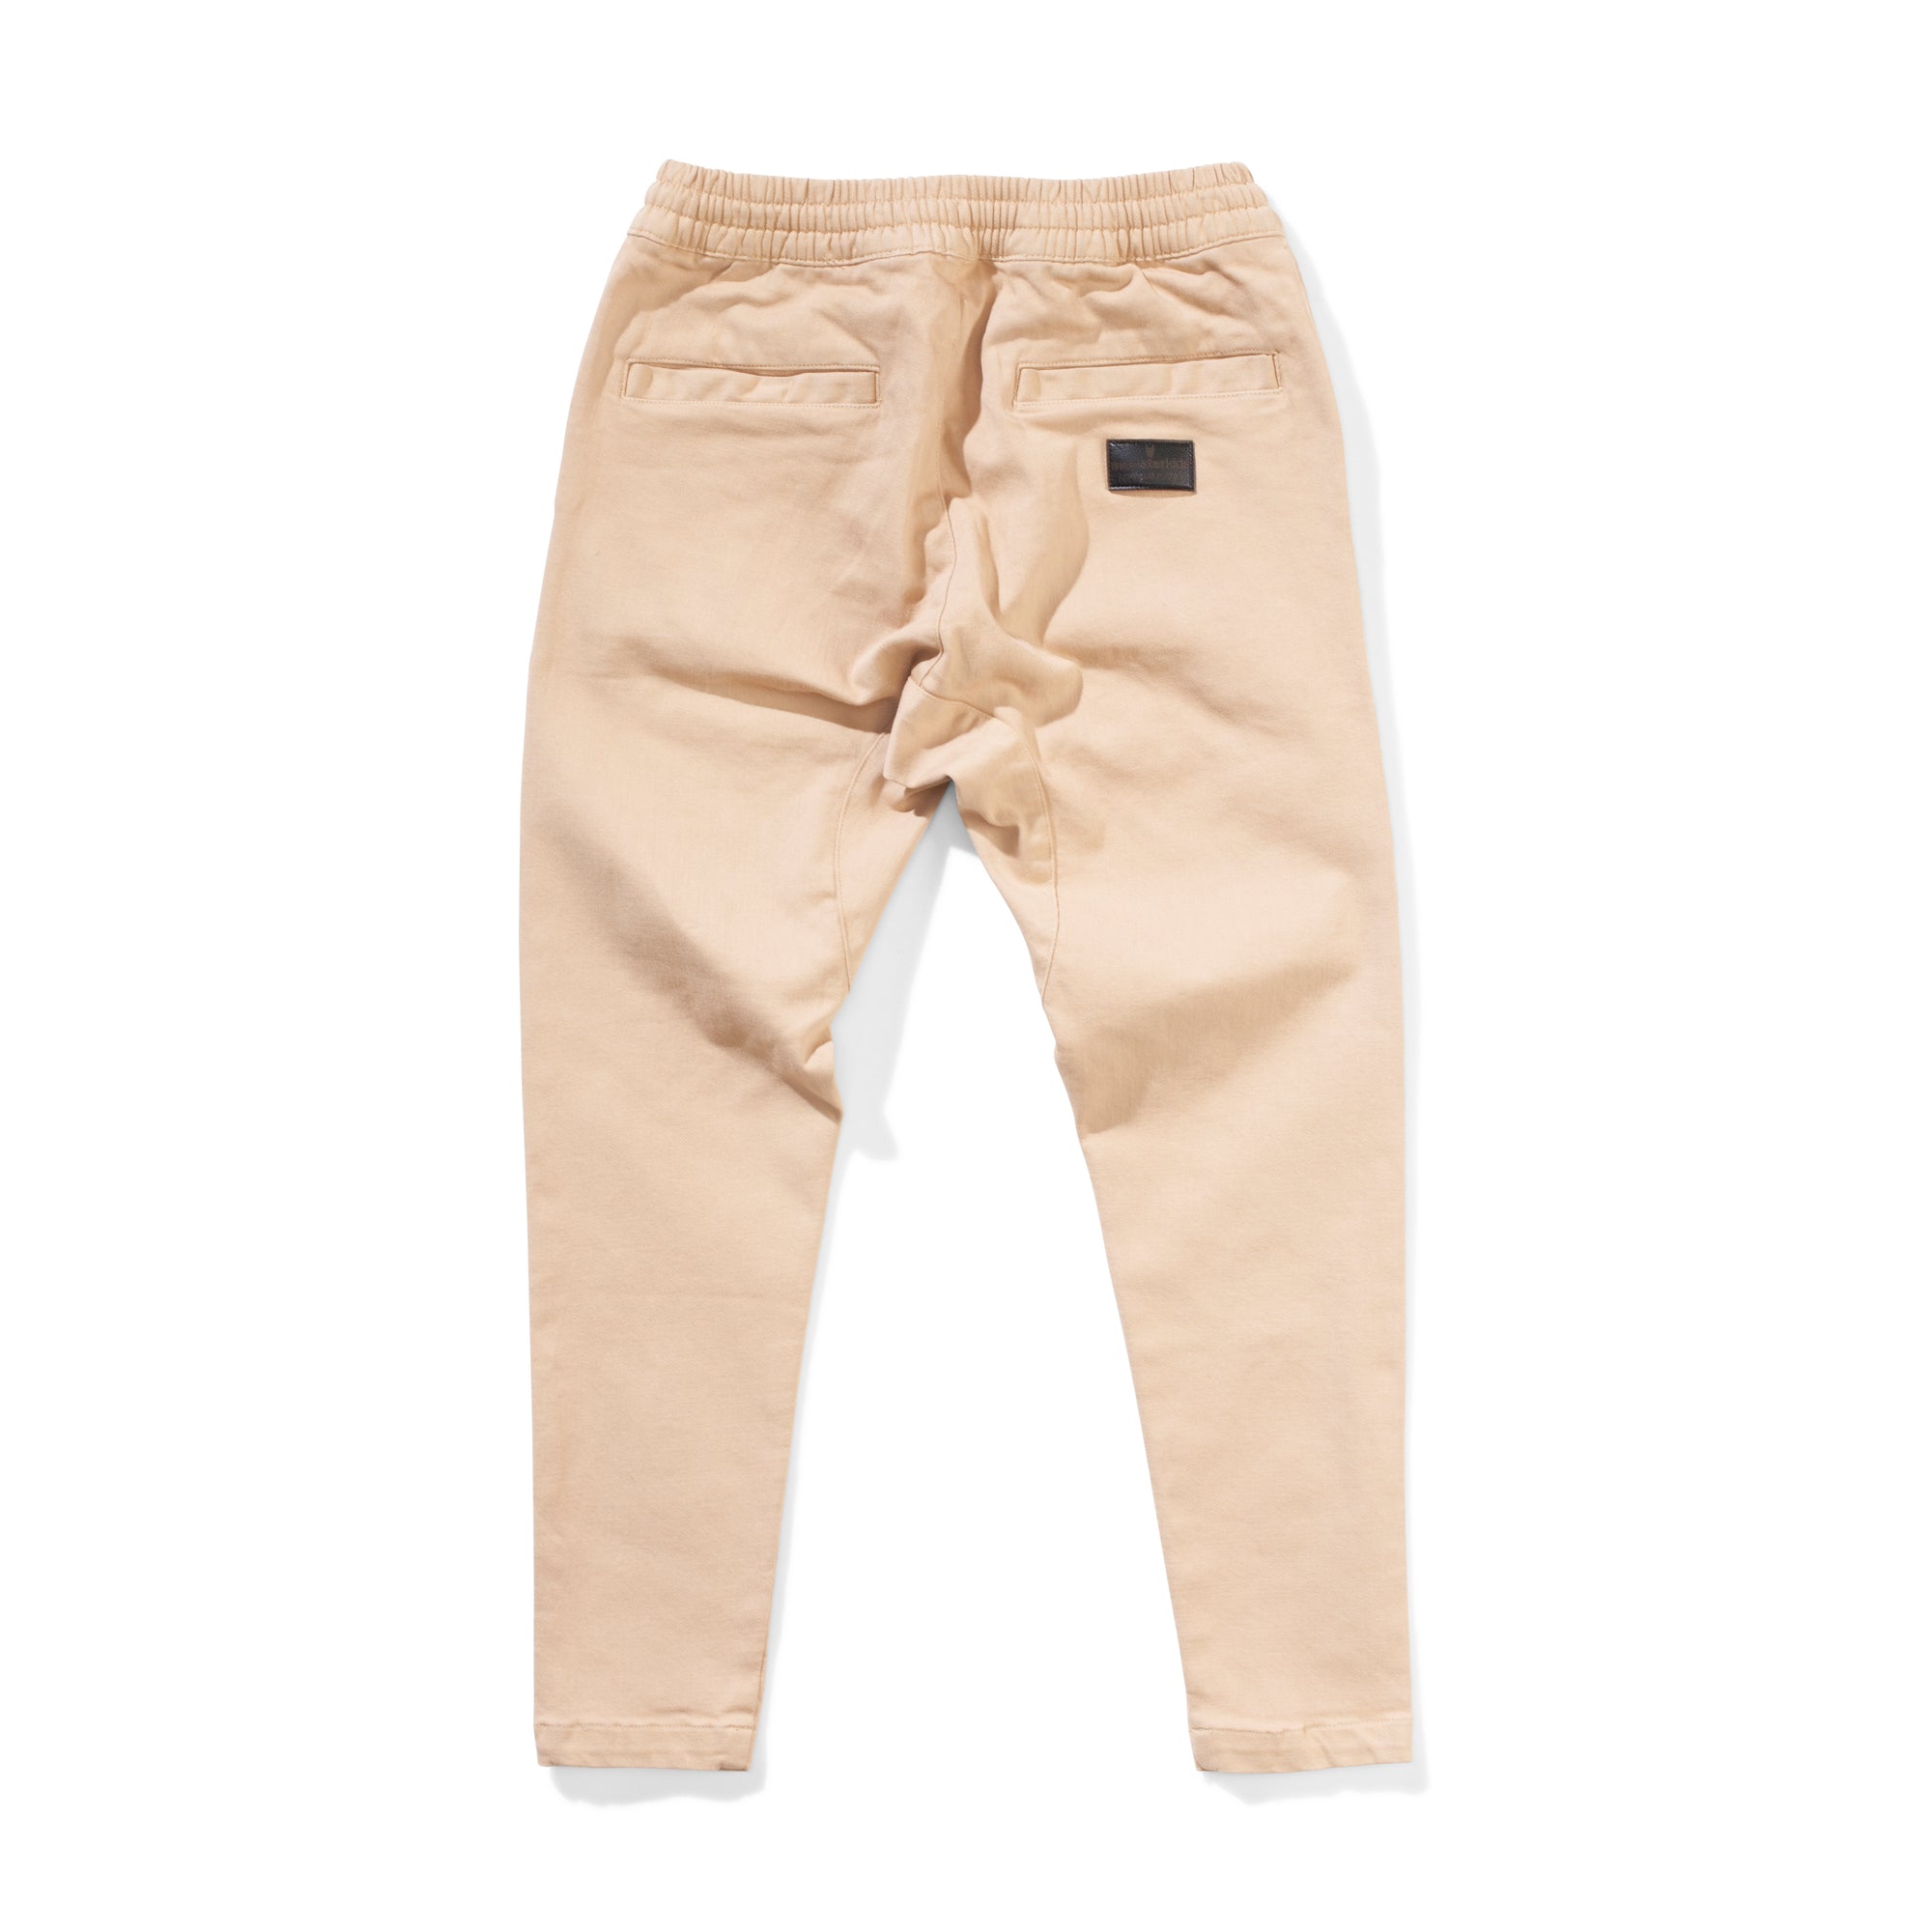 beam 2 pant in washed sand